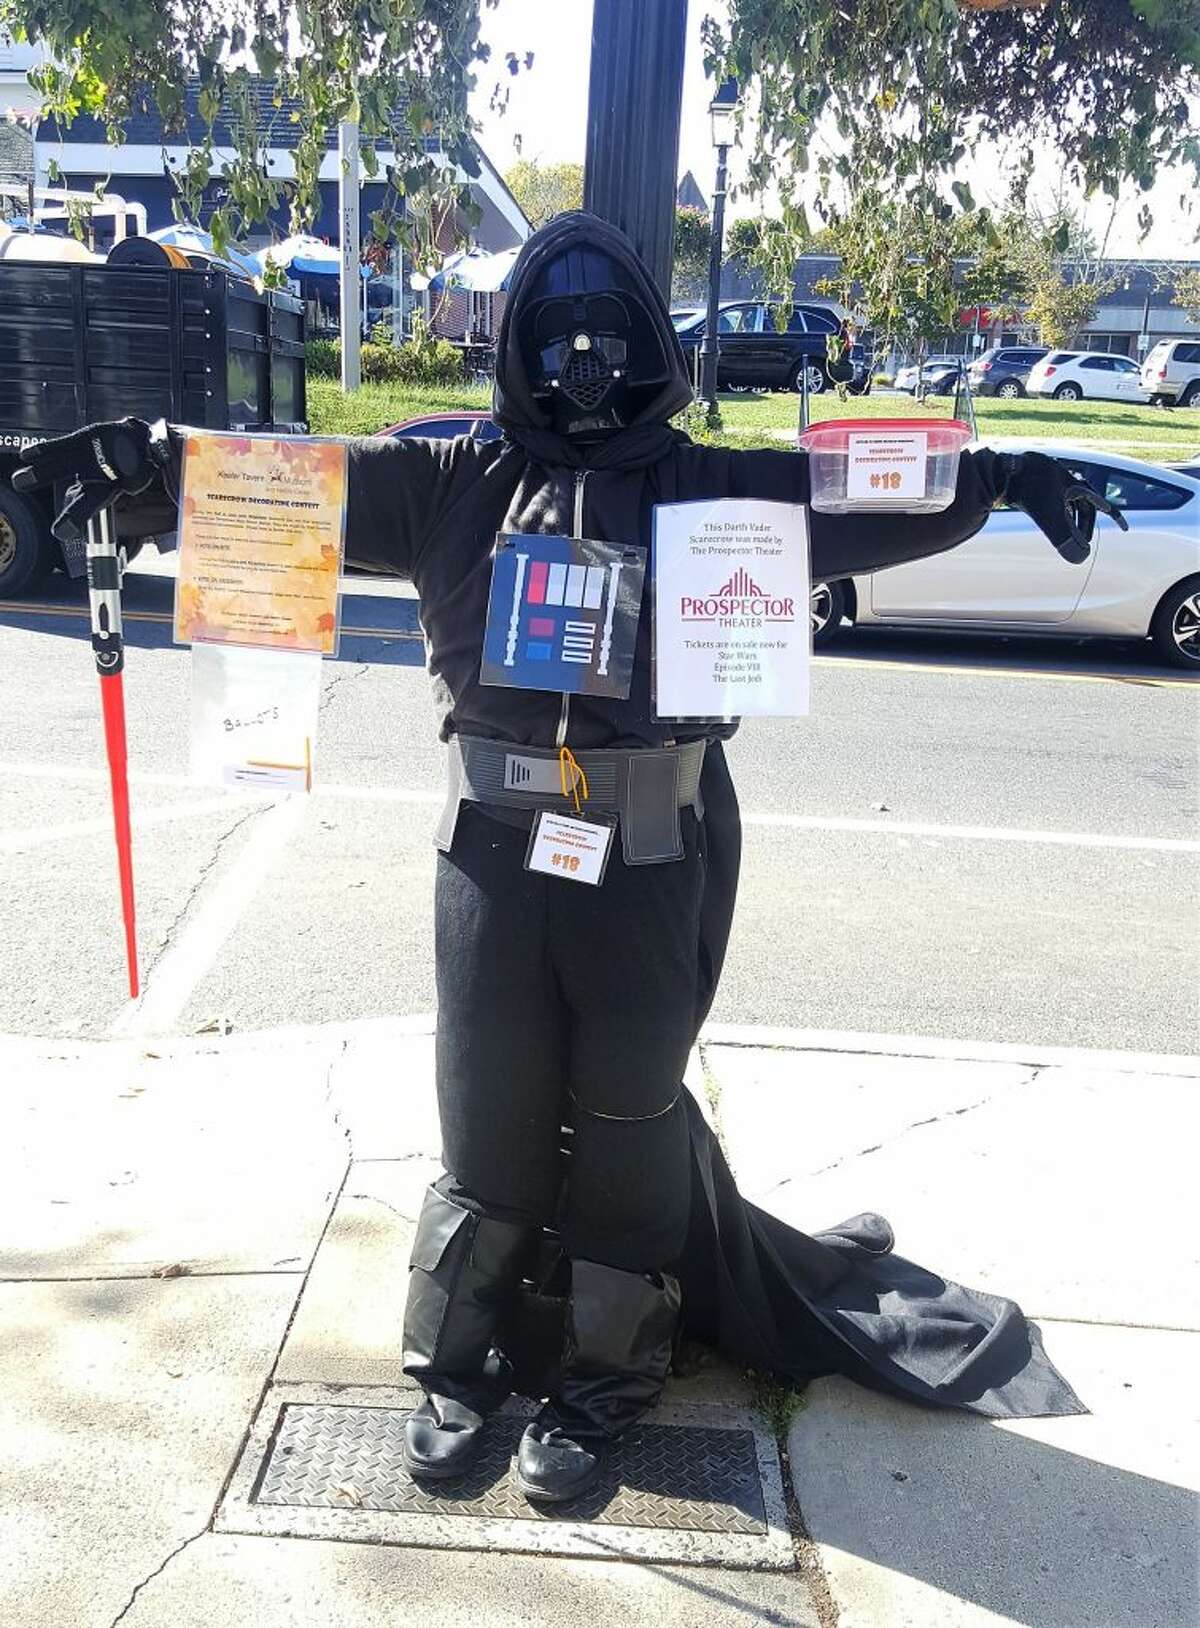 The 2017 Scarecrow Contest ballot vote winner Darth Vader scarecrow by The Prospector Theater.